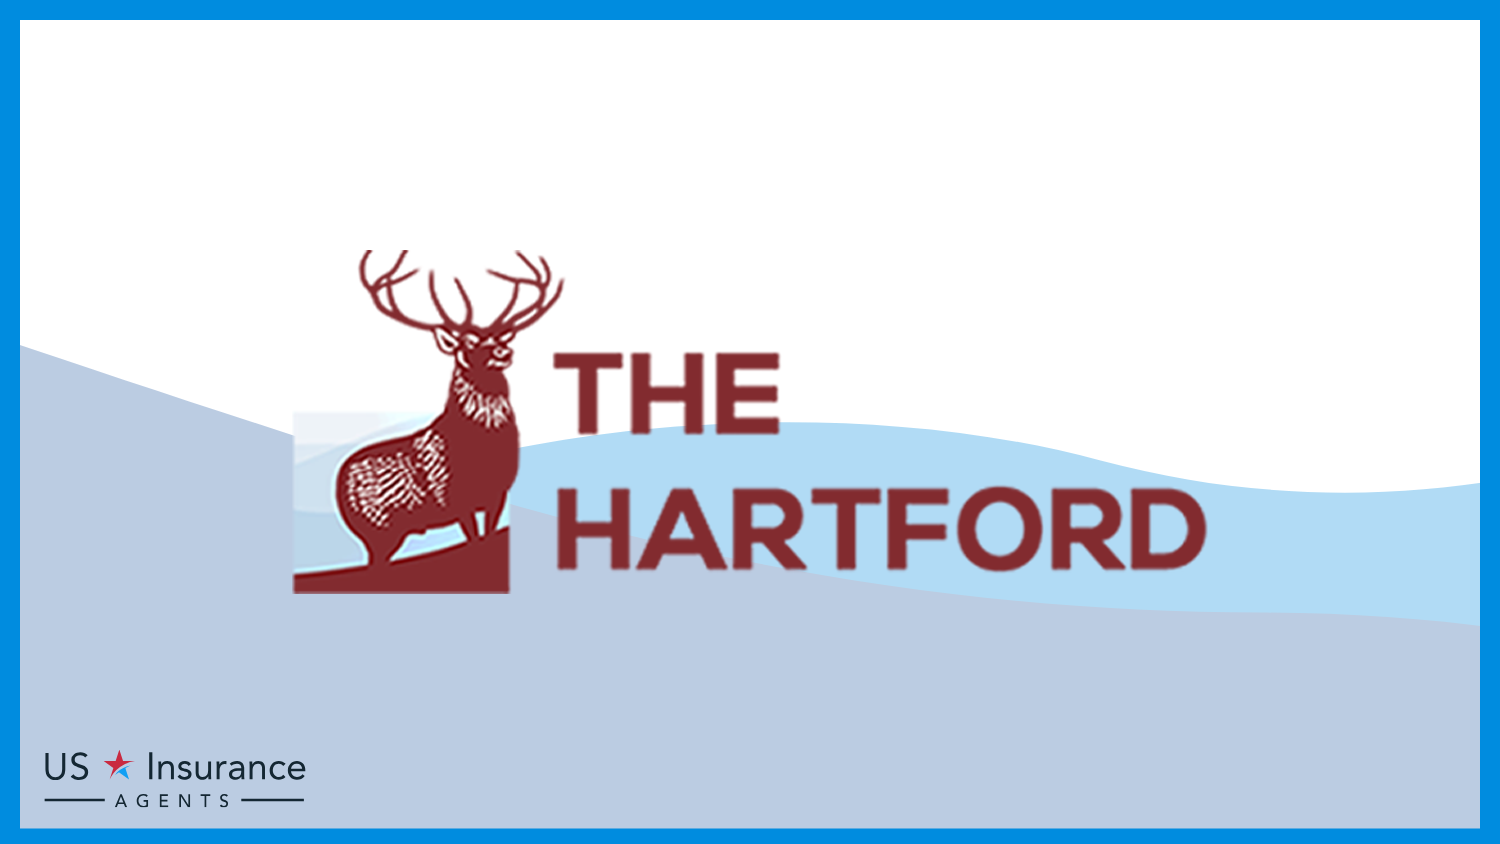 The Hartford: Best Business Insurance for ATM Companies